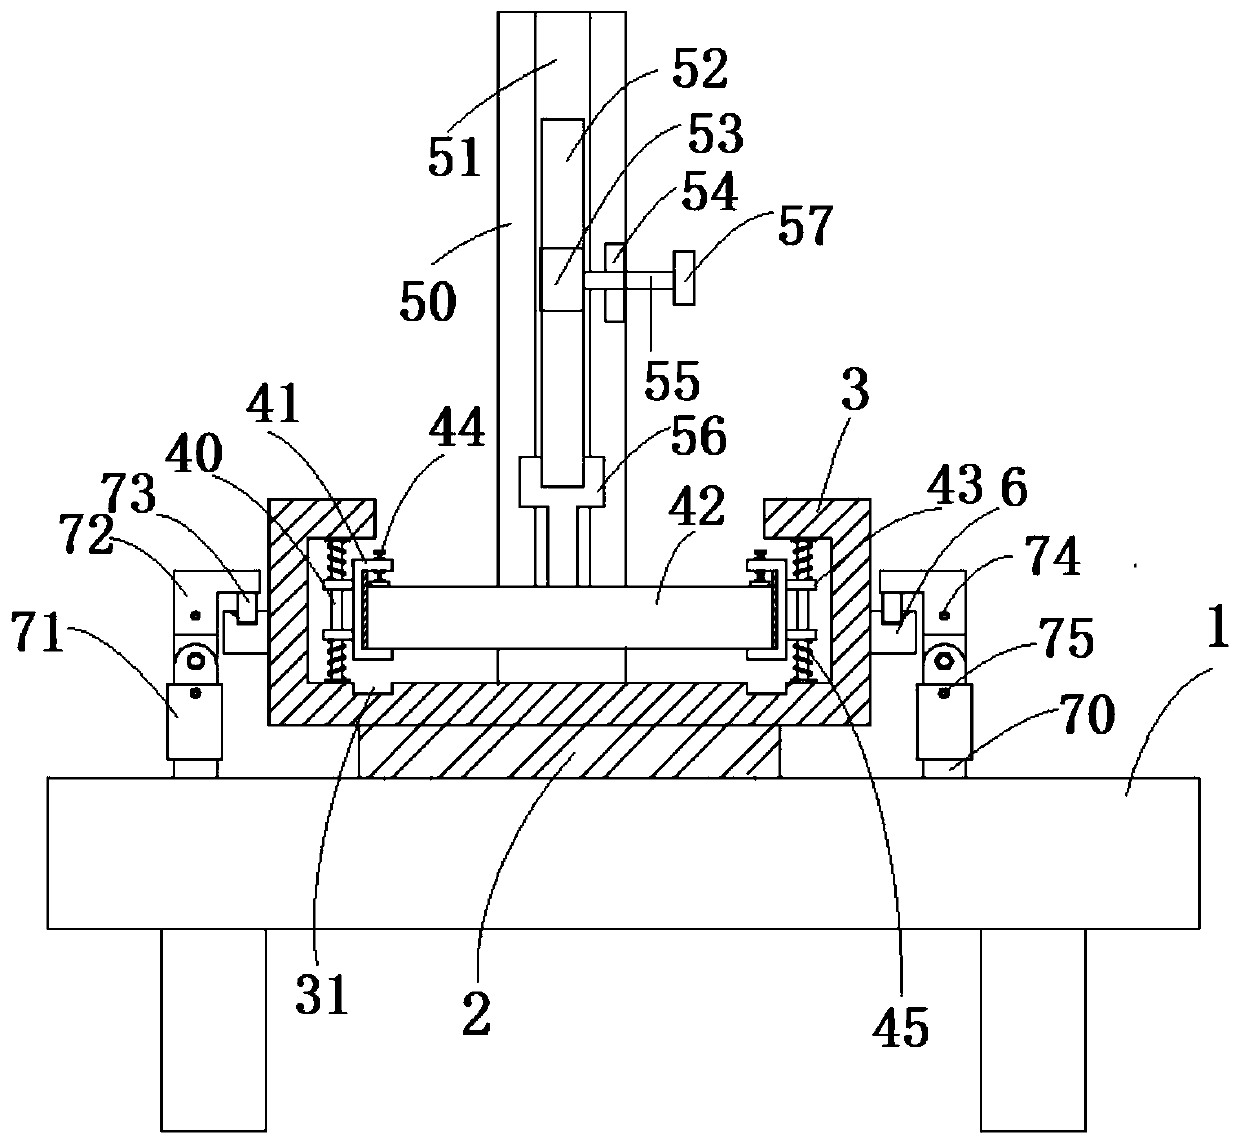 Tablet pressing device for pharmaceutical engineering